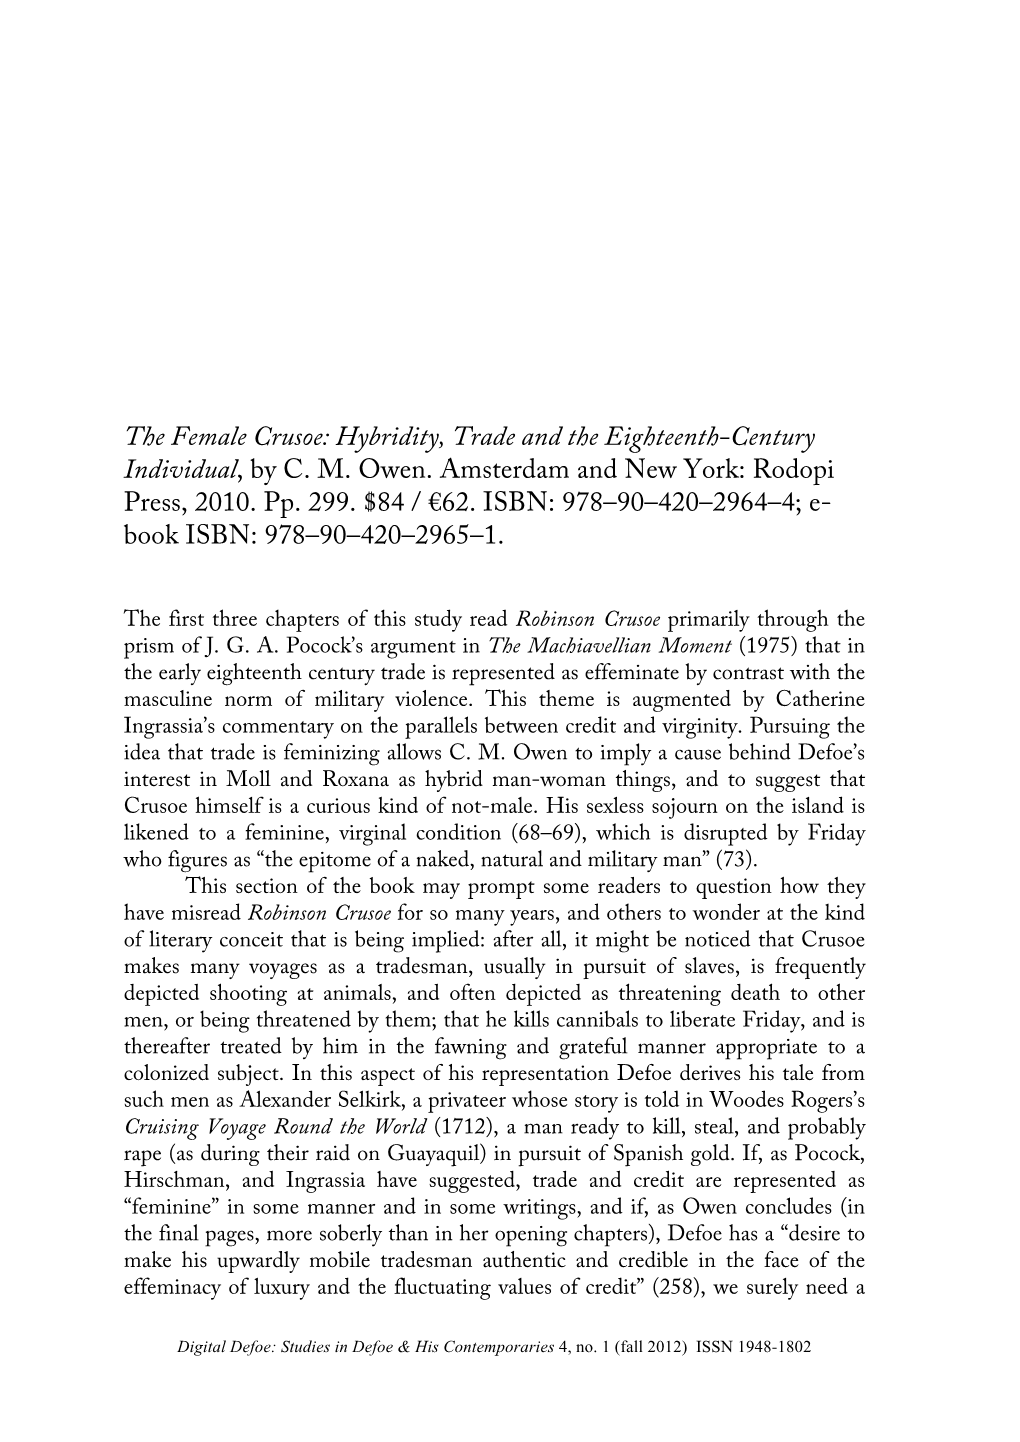 The Female Crusoe: Hybridity, Trade and the Eighteenth-Century Individual, by C